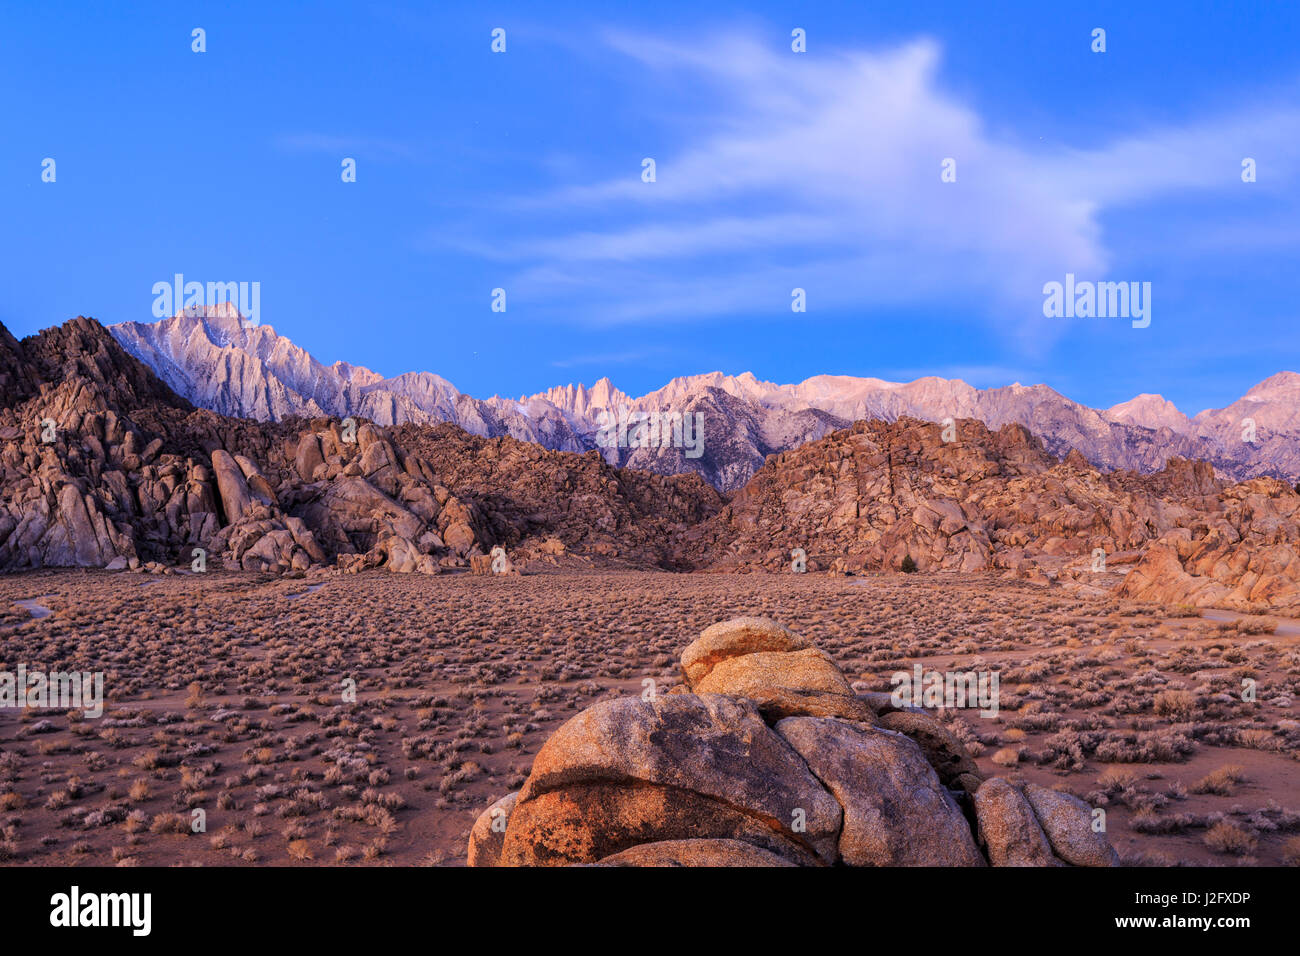 A long exposure image of Mount Whitney and Lone Pine Peak above the Alabama Hills region outside of Lone Pine, California. Stock Photo